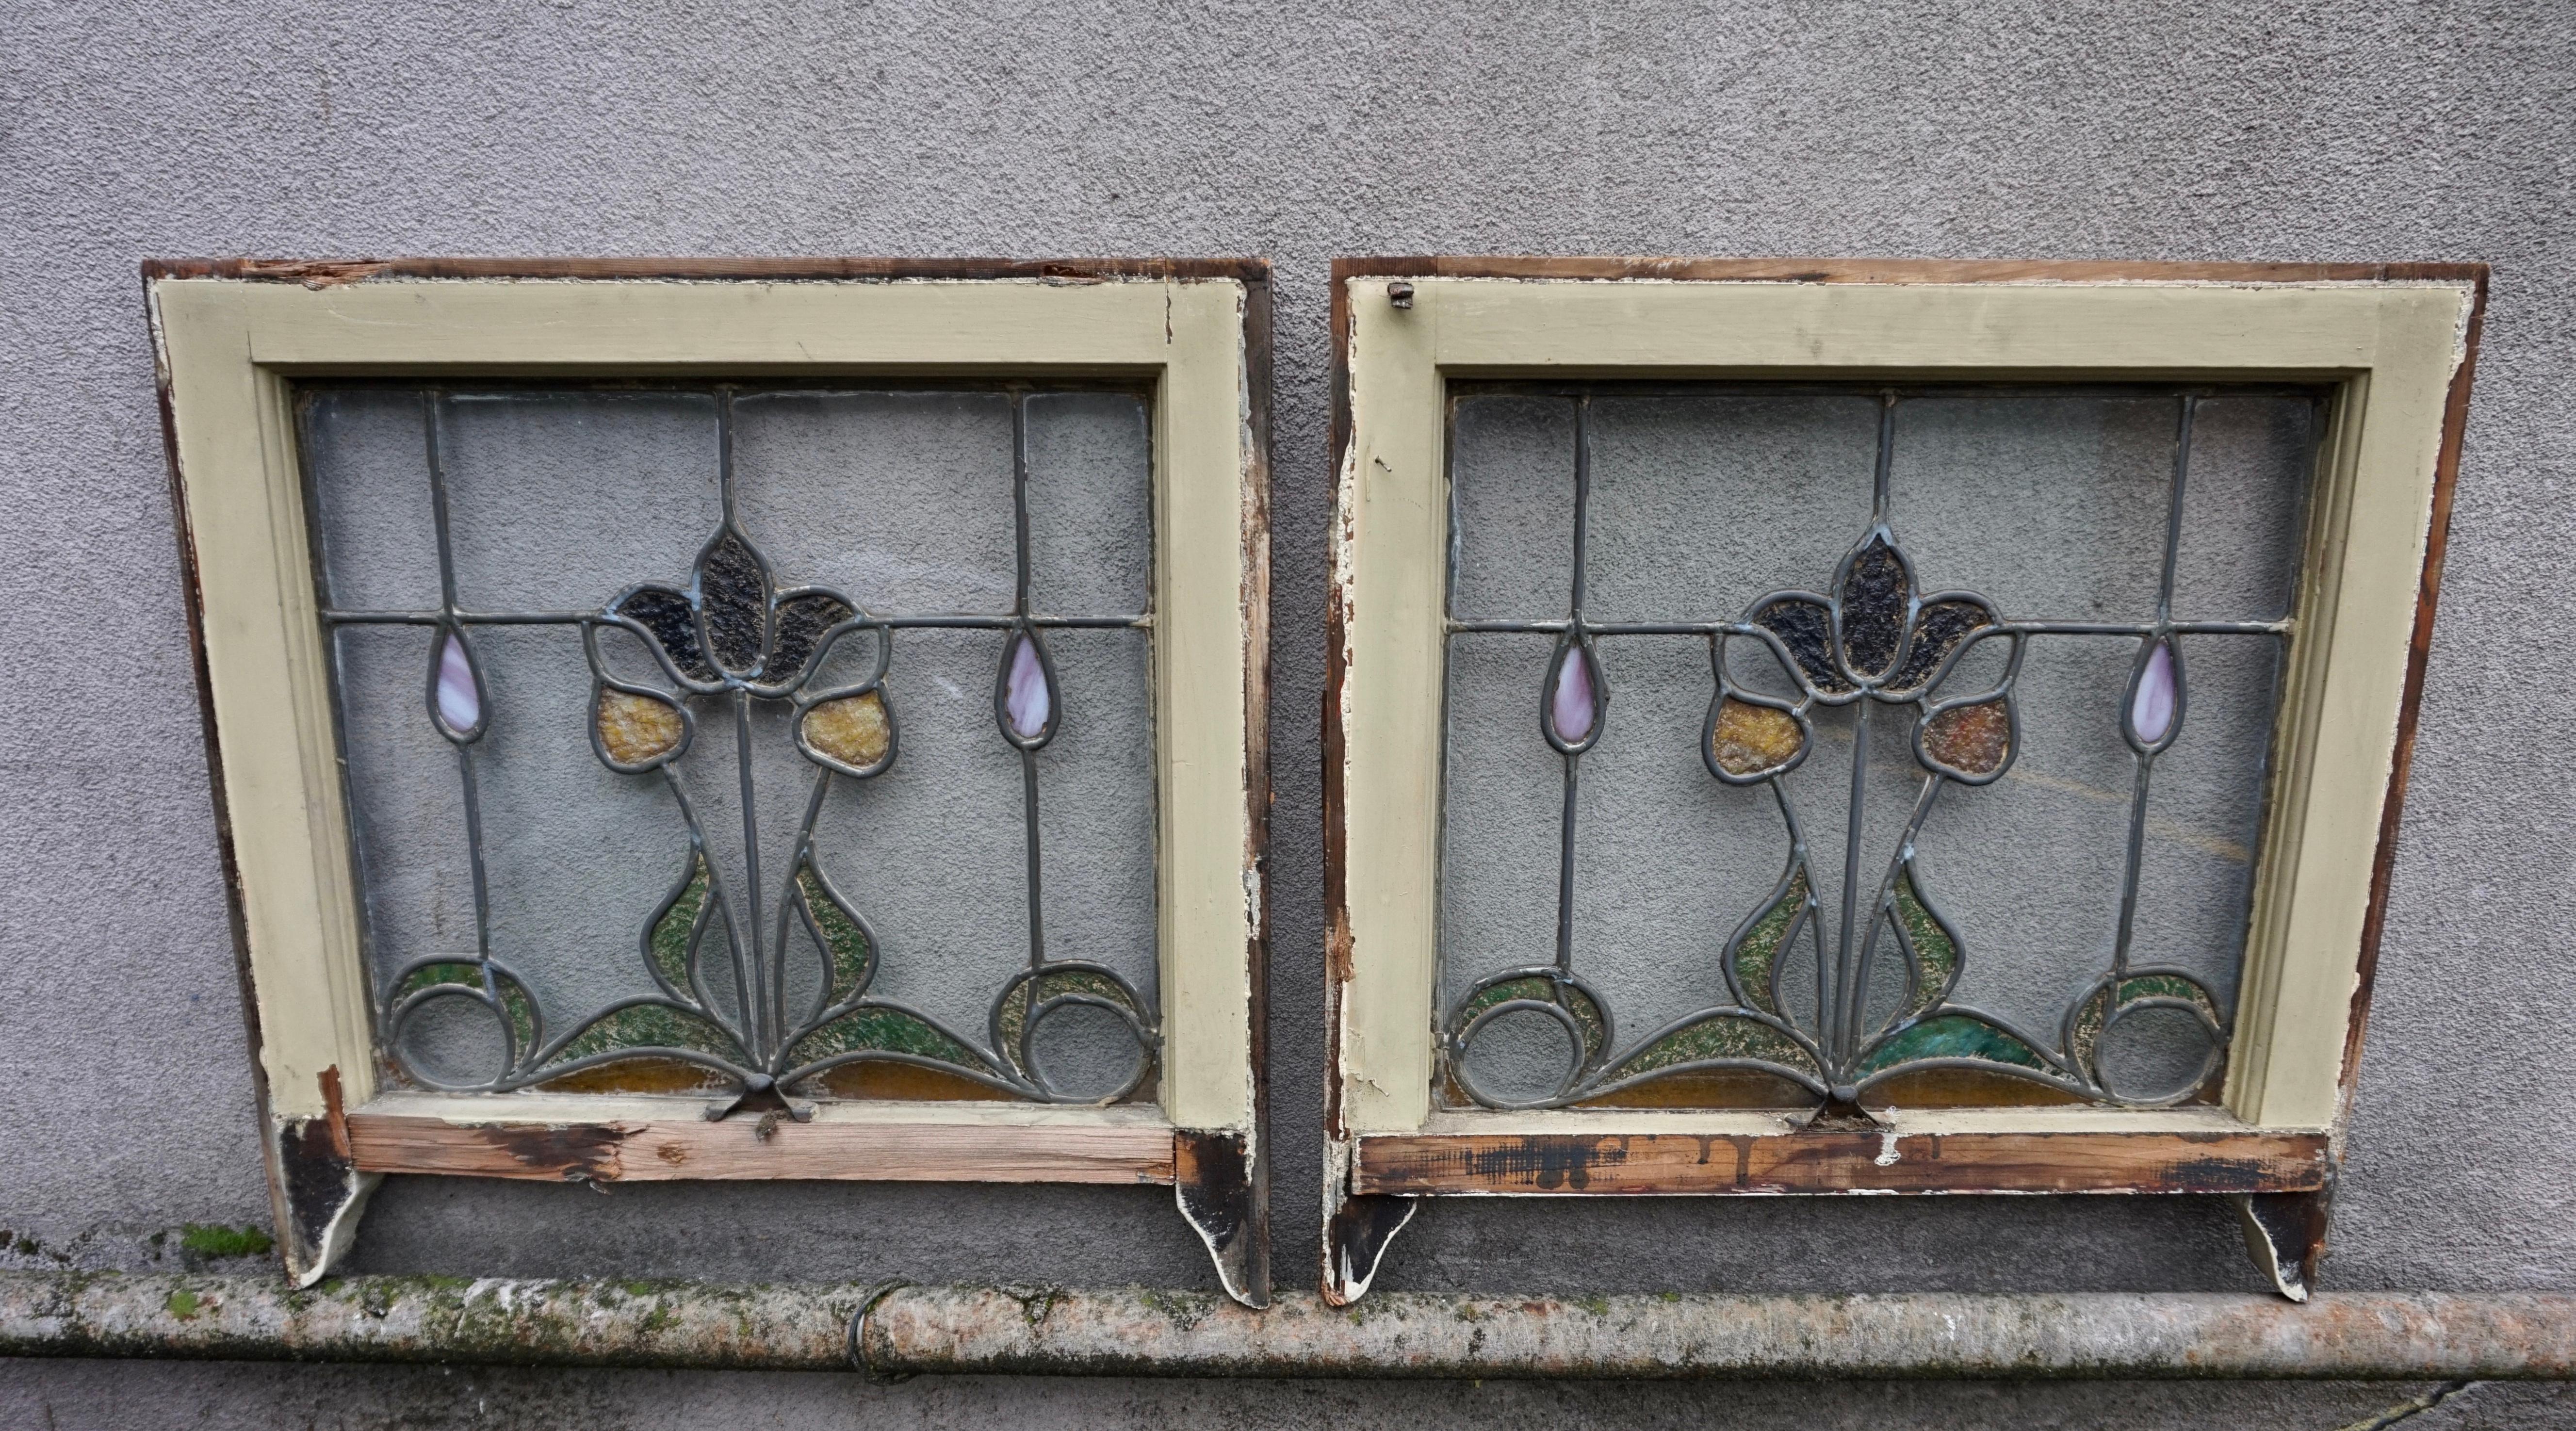 Pair Of Rare Art Nouveau Stain Glass Windows With Scrolling Tulip & Bud Motif For Sale 9